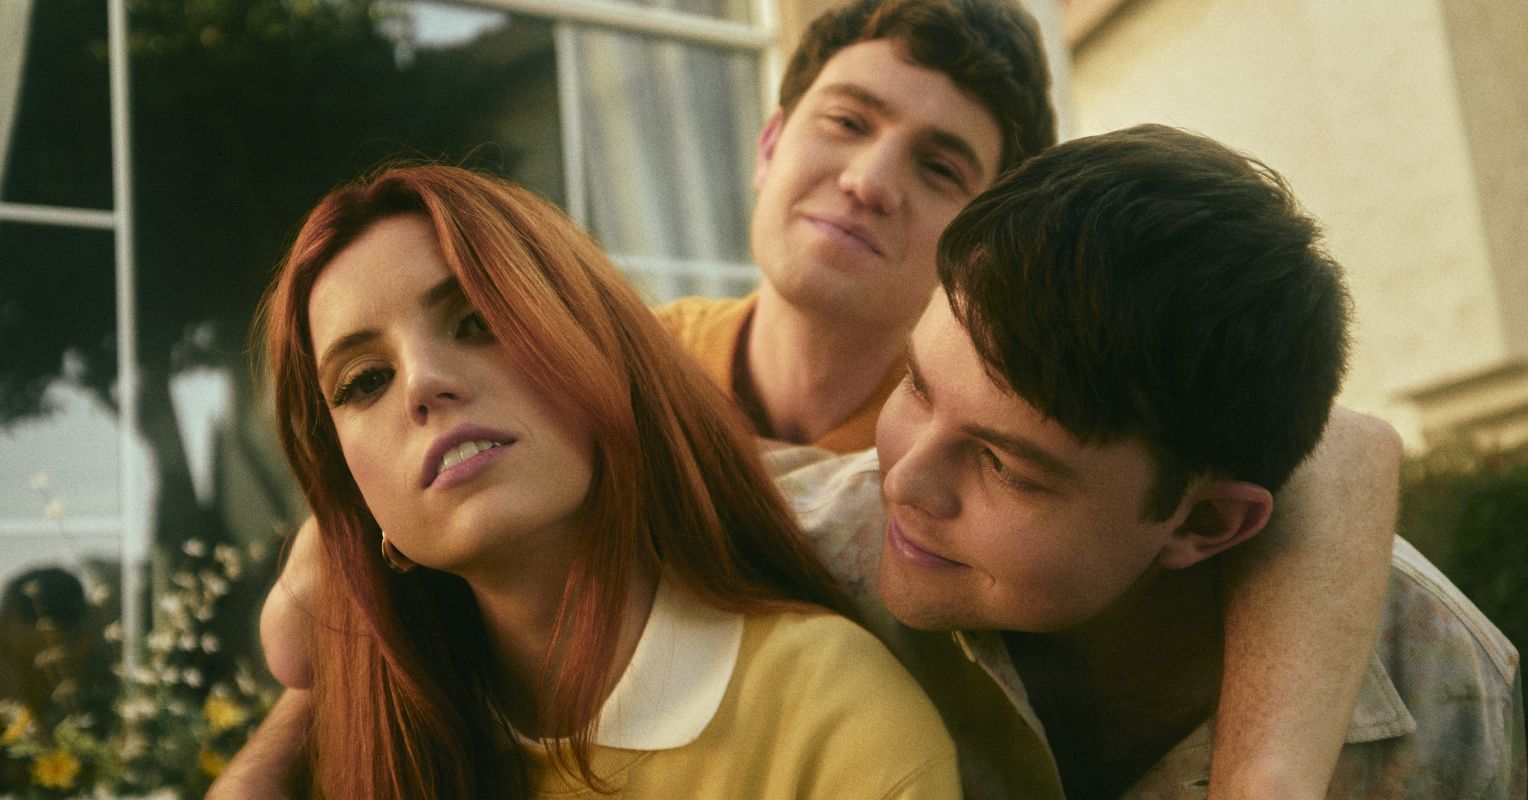 What We Can Be taught From Echosmith About Feeling “Cracked”